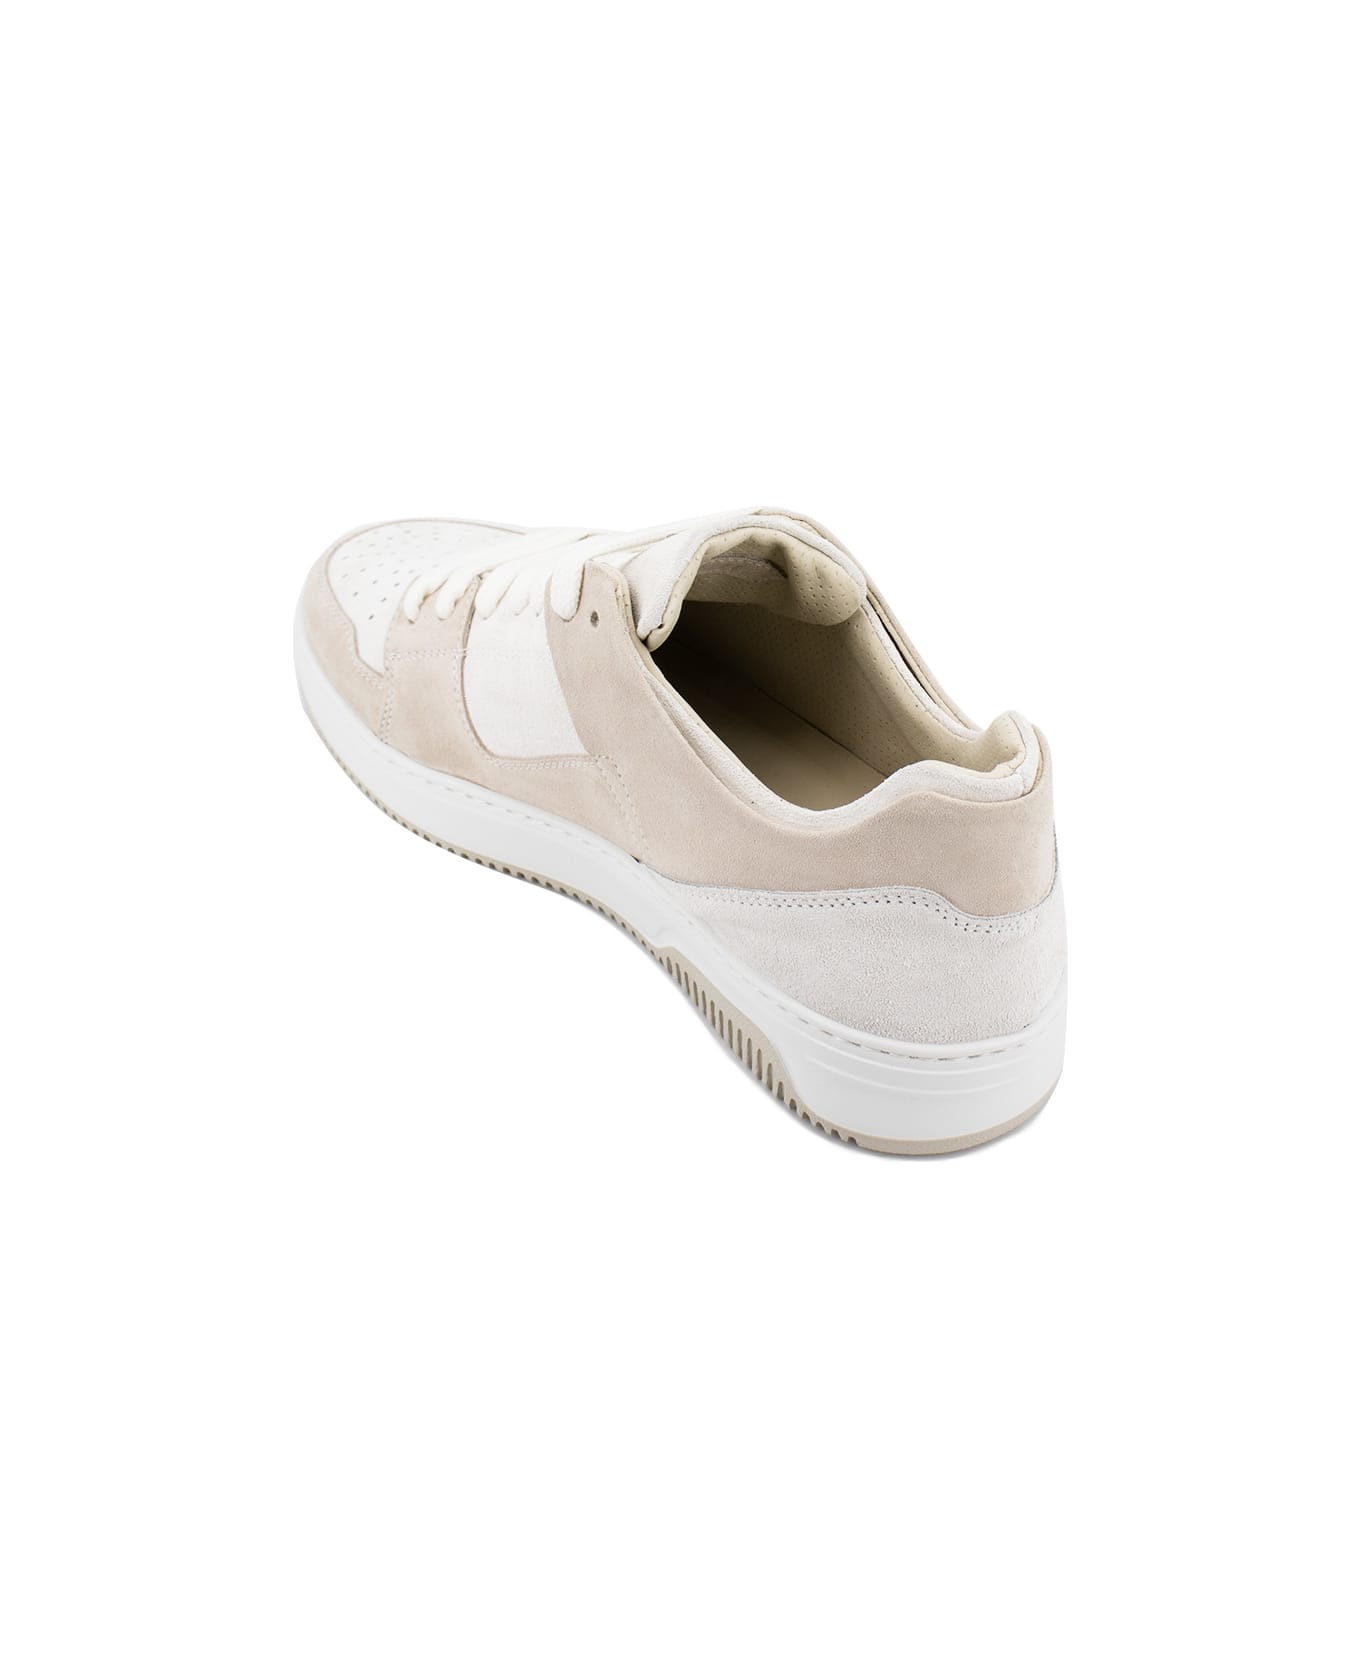 Eleventy Sneakers - SAND AND WHITE スニーカー